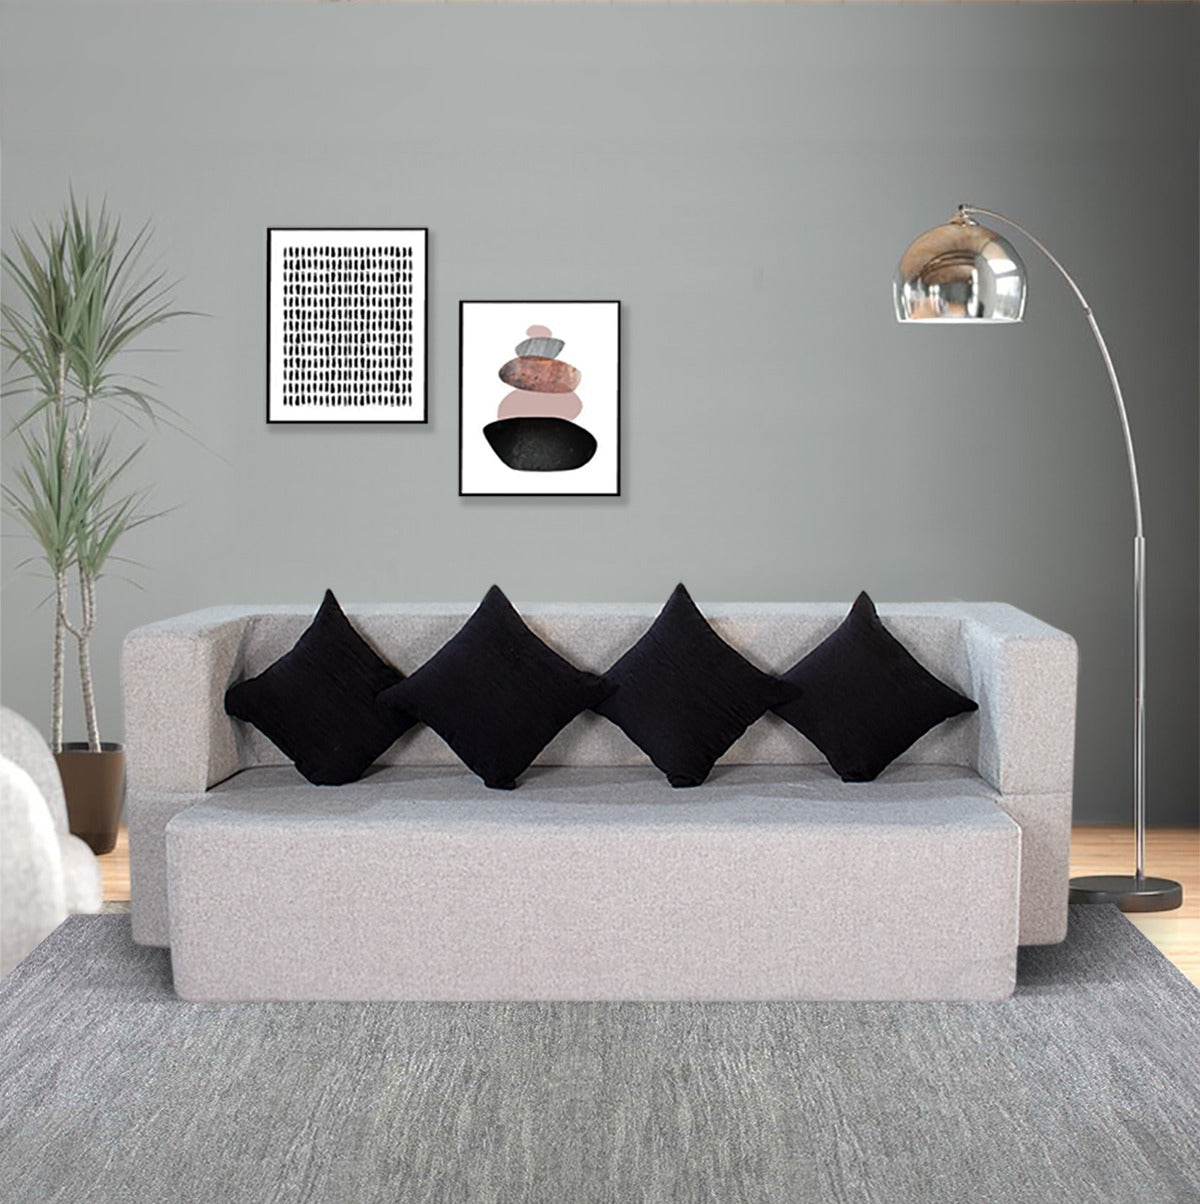 Cover of Light Grey Jute Fabric (78"x44"x14") FlipperX Sofa cum Bed with 4 Black Cushion Covers